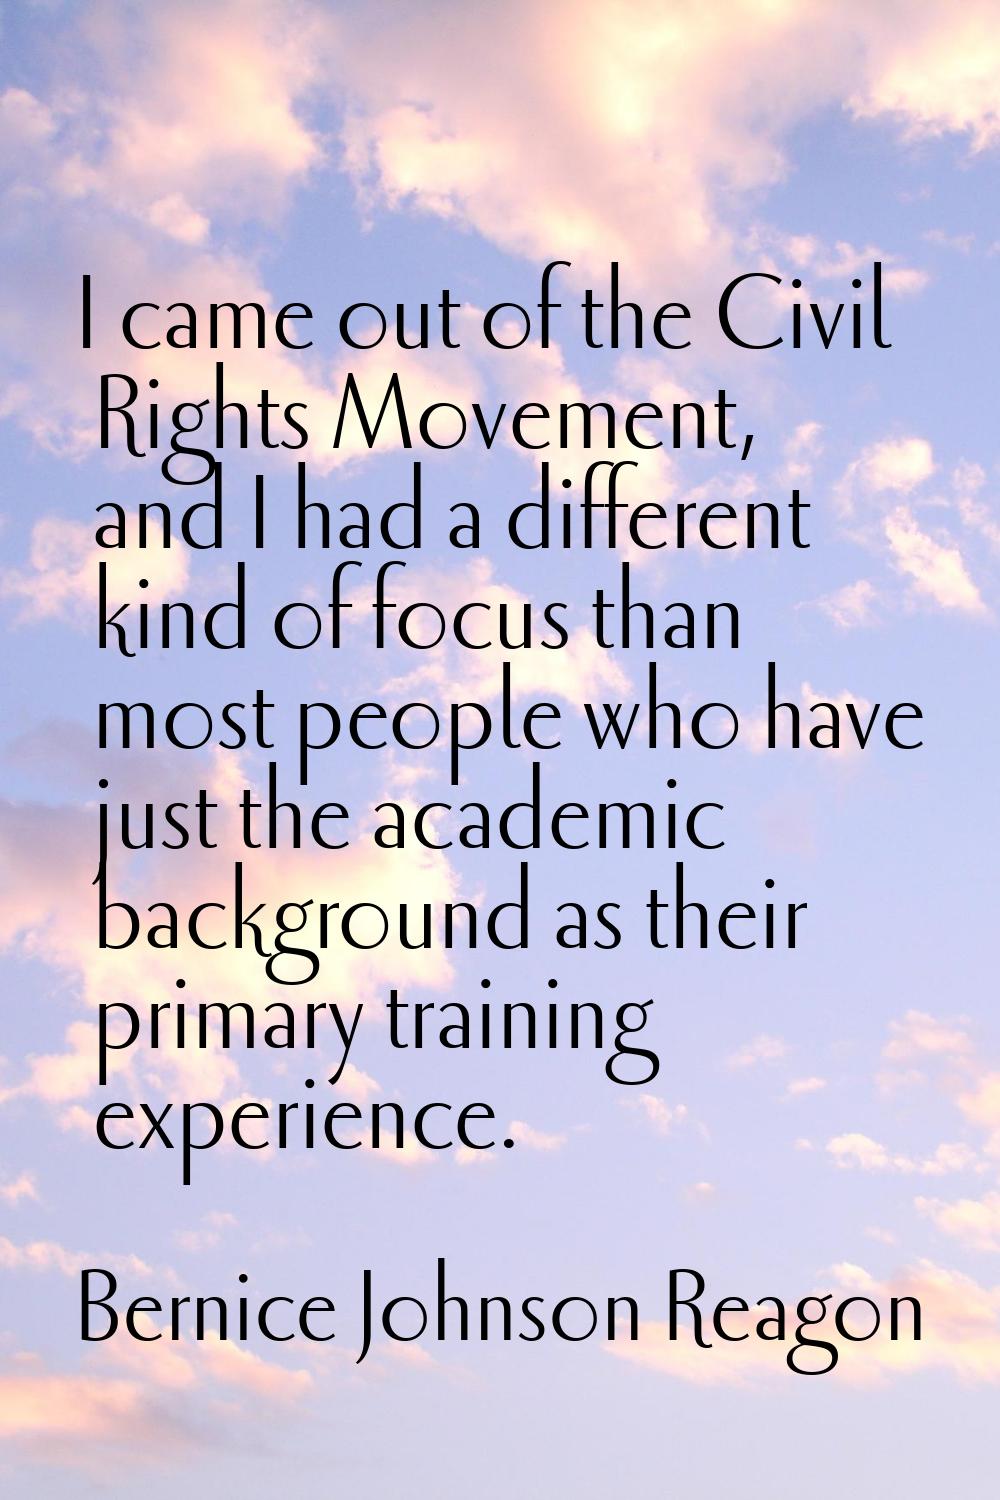 I came out of the Civil Rights Movement, and I had a different kind of focus than most people who h